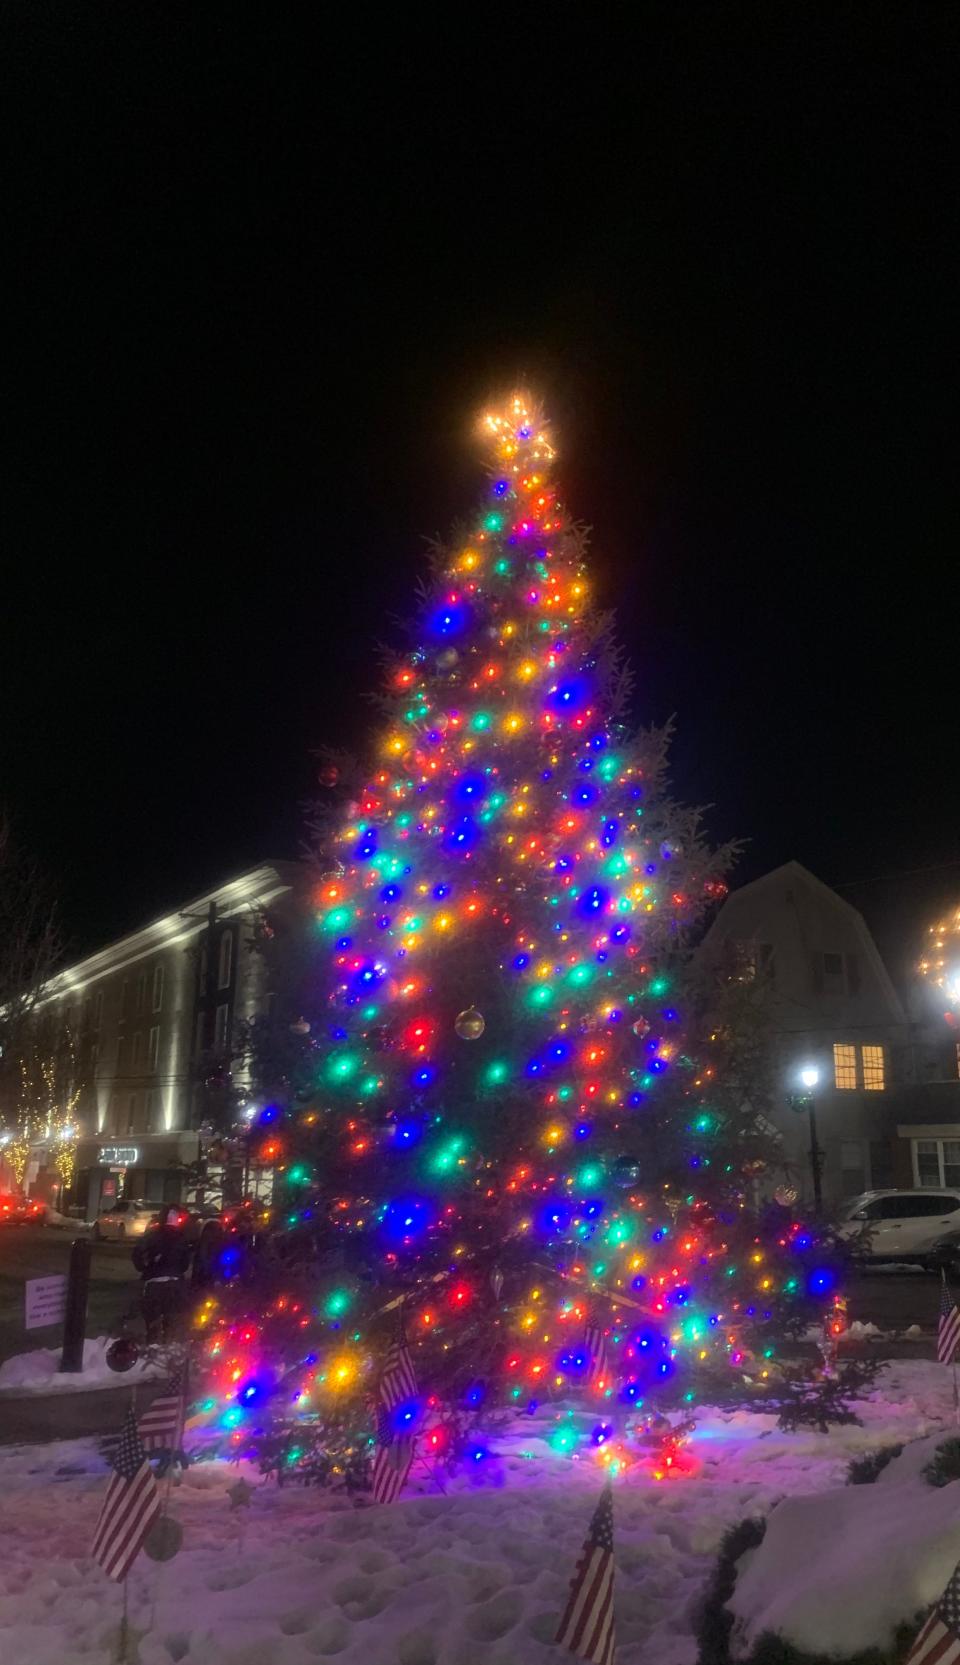 The Christmas tree at Courthouse Square in Stroudsburg